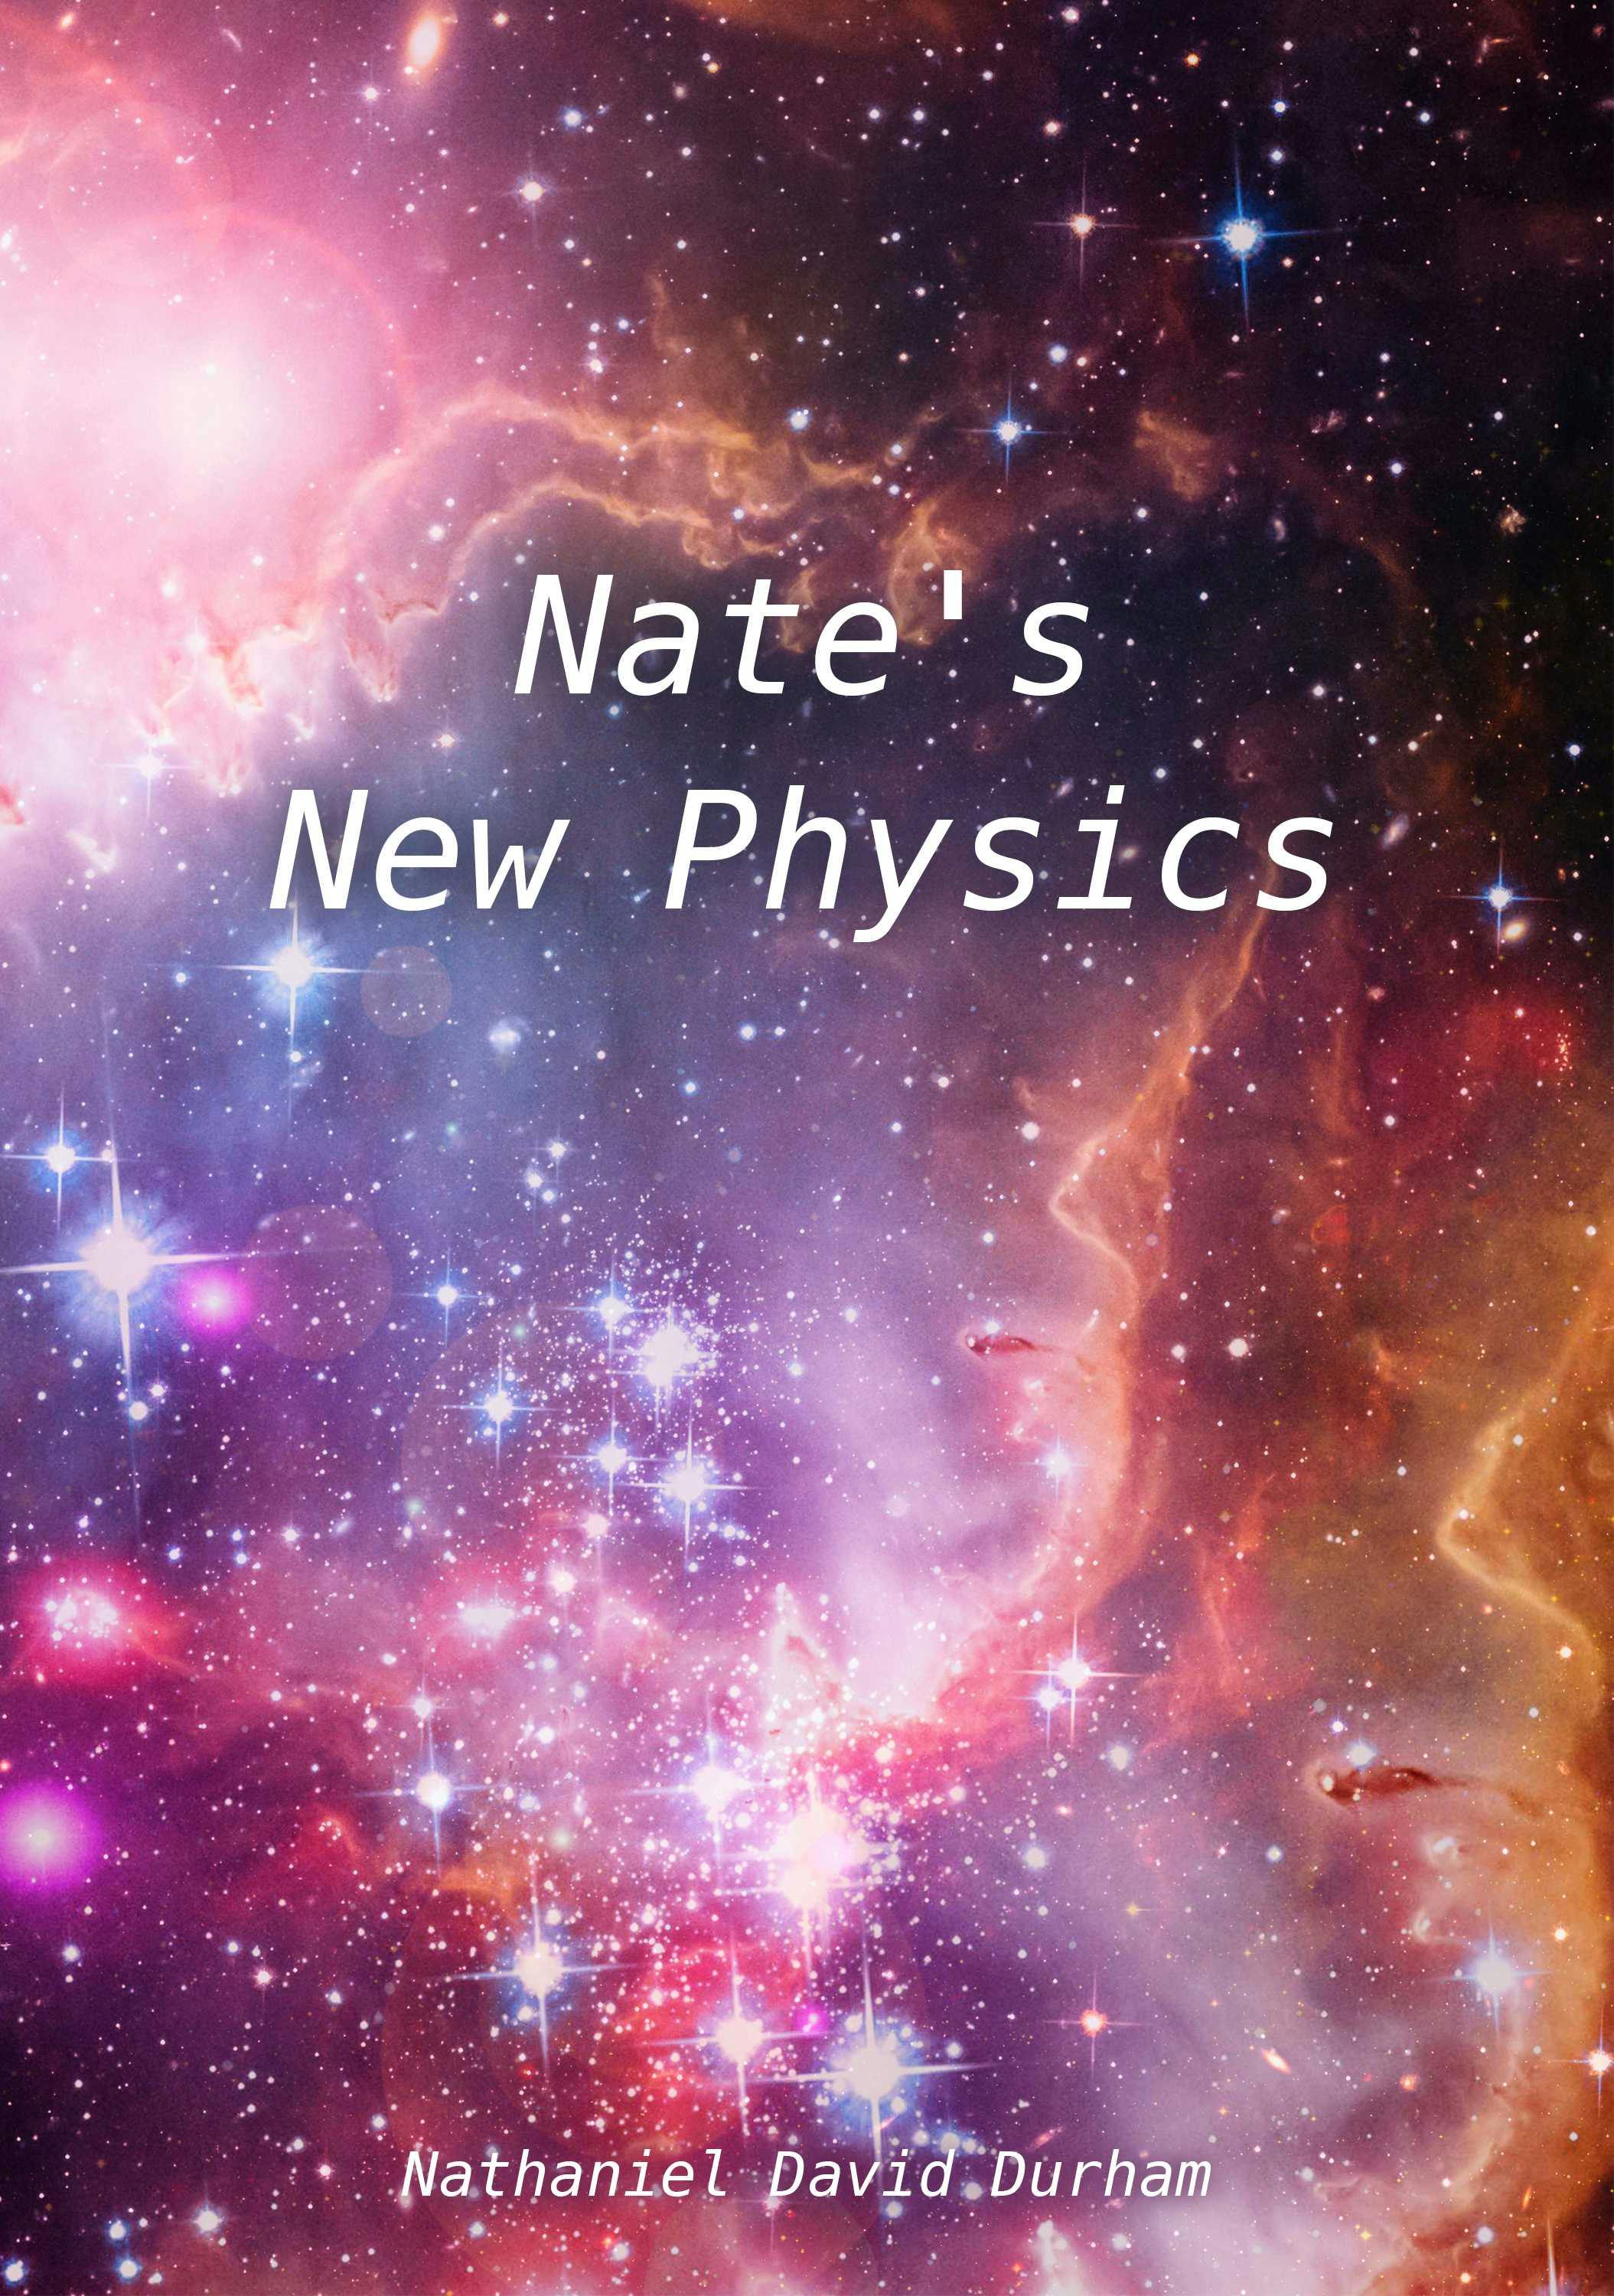 Nate's New Physics: A short book of Nate's theoretical works. - Nathaniel David Durham